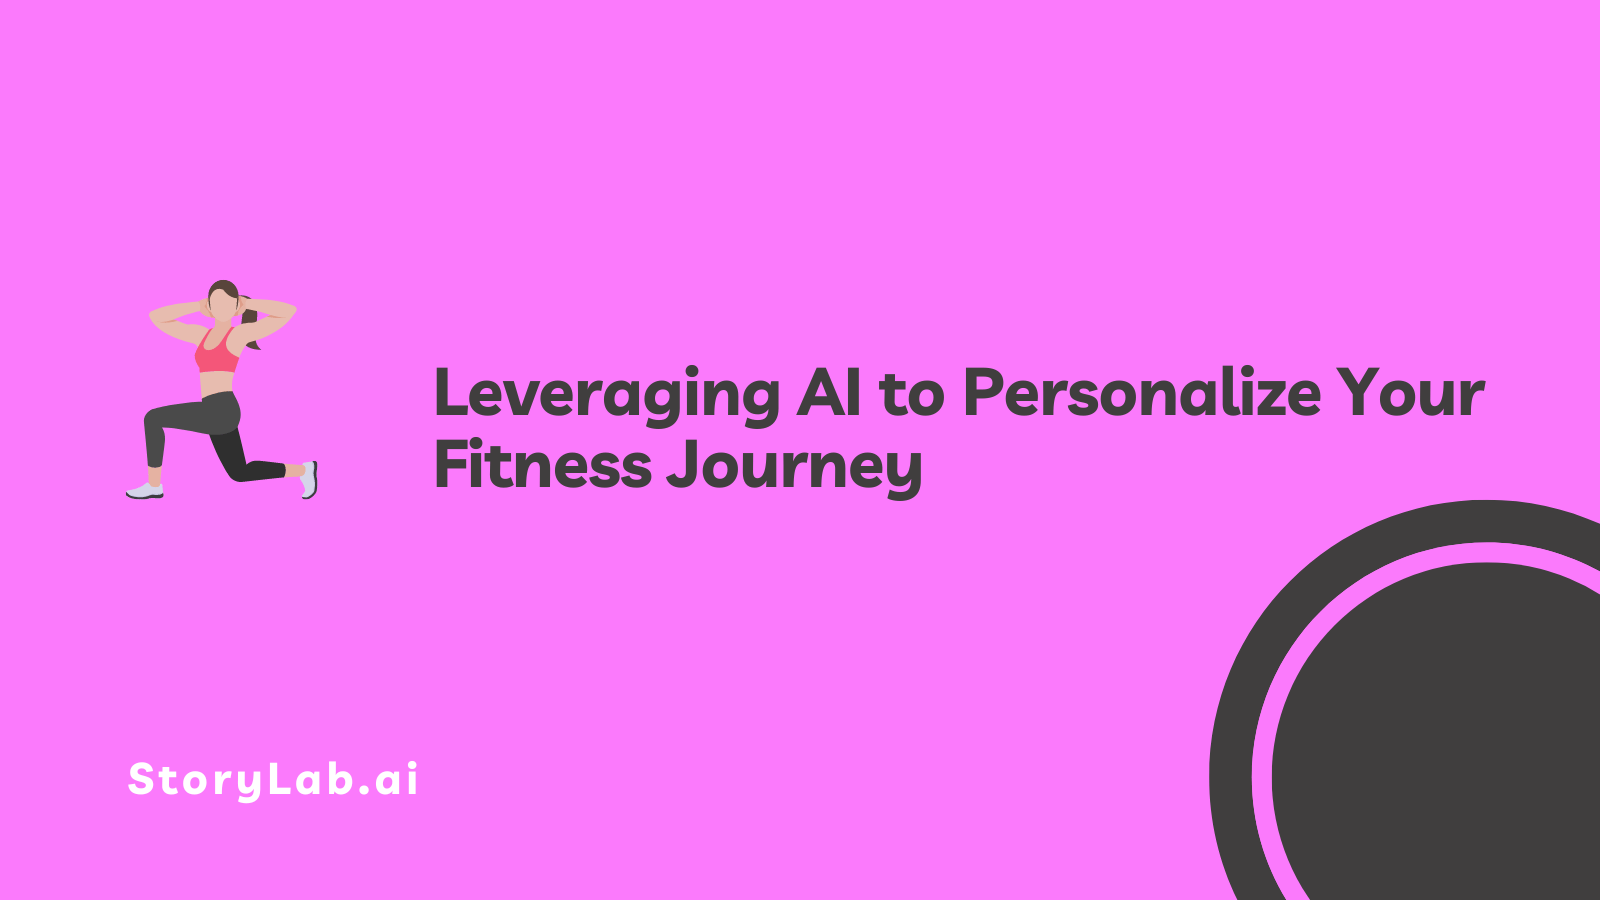 Leveraging AI to Personalize Your Fitness Journey